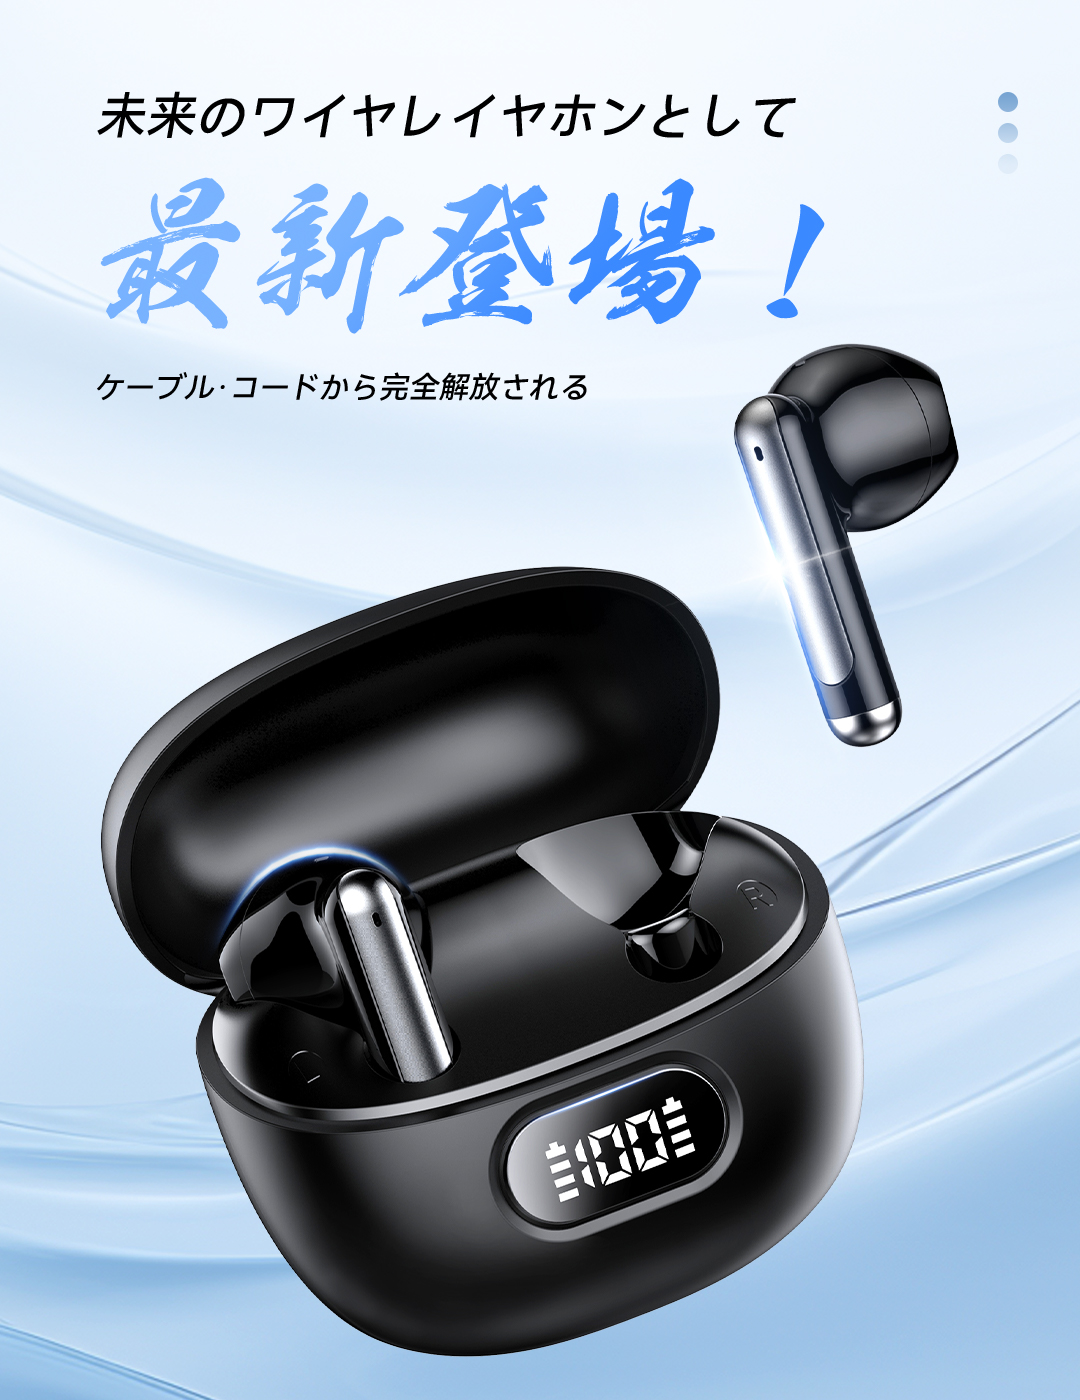  wireless earphone bluetooth5.3 sound quality effect adjustment iBliss Appli correspondence ENC+CVC8.0 noise cancel ring Japanese sound guide remainder amount display sudden speed charge height sound quality 30 hour music reproduction 